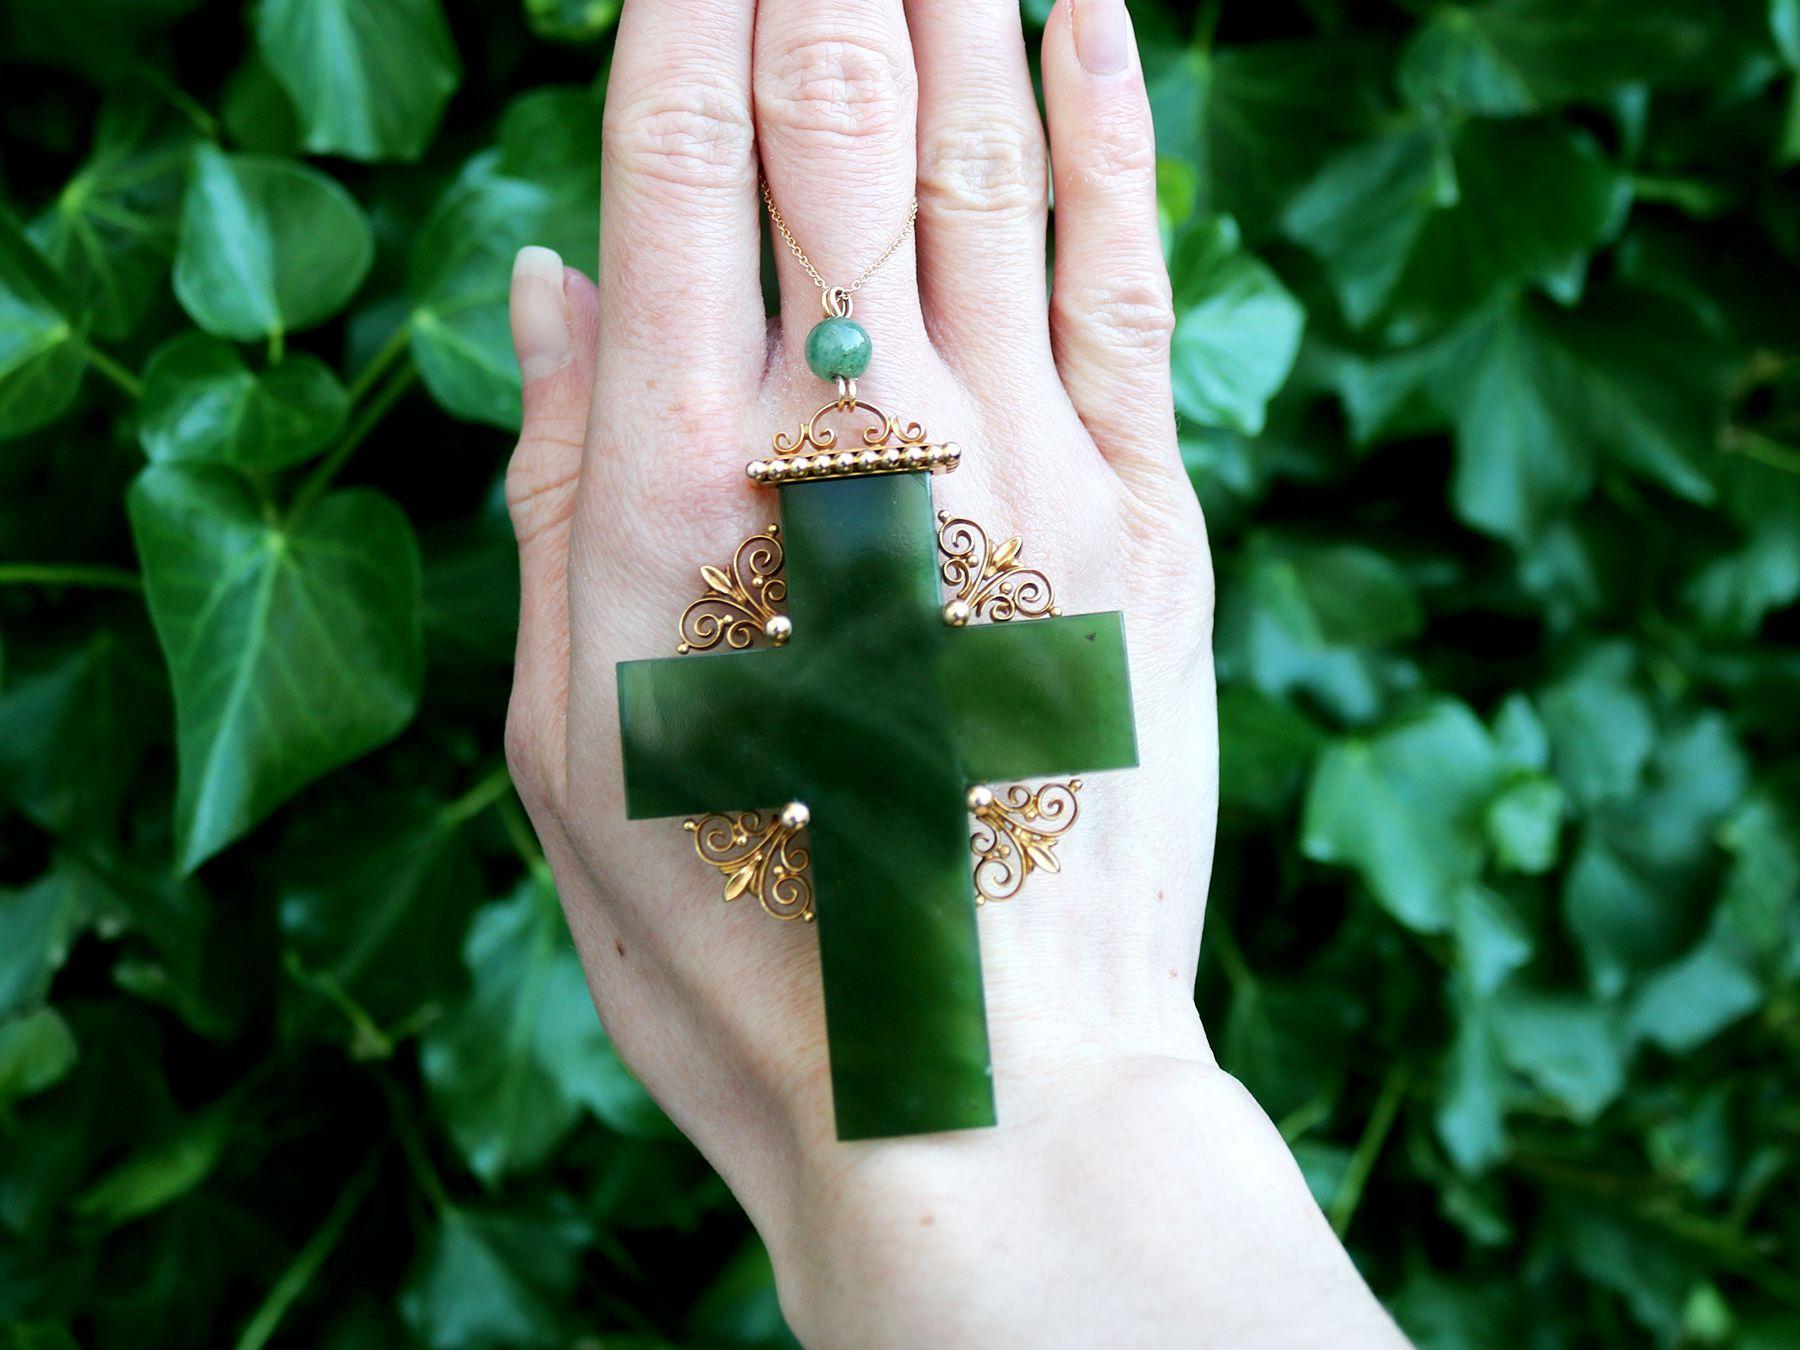 A stunning, fine and impressive antique Victorian 39.32 carat nephrite and 18 karat yellow gold cross pendant; part of our diverse antique jewelry and estate jewelry collections.

This stunning, fine and impressive antique pendant has been crafted